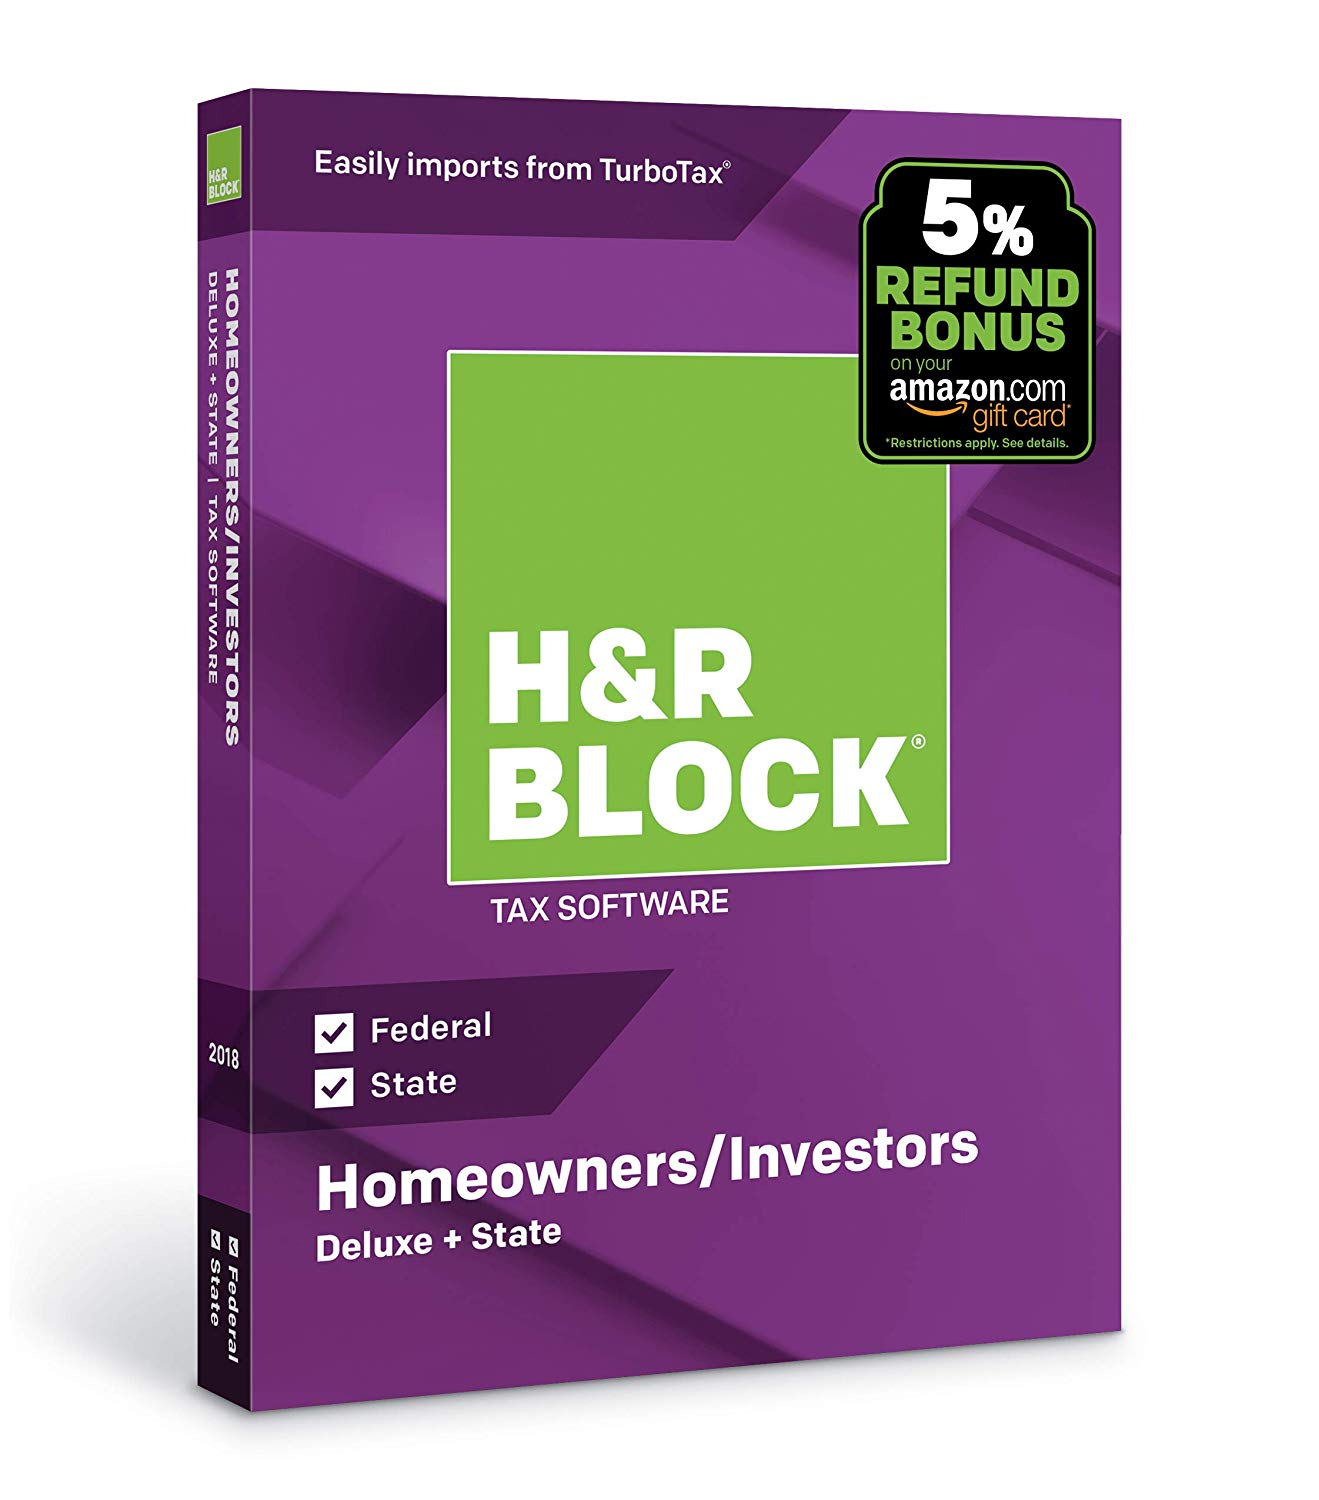 H&R Block Tax Software Deluxe + State 2018 with 5 Refund Bonus Offer